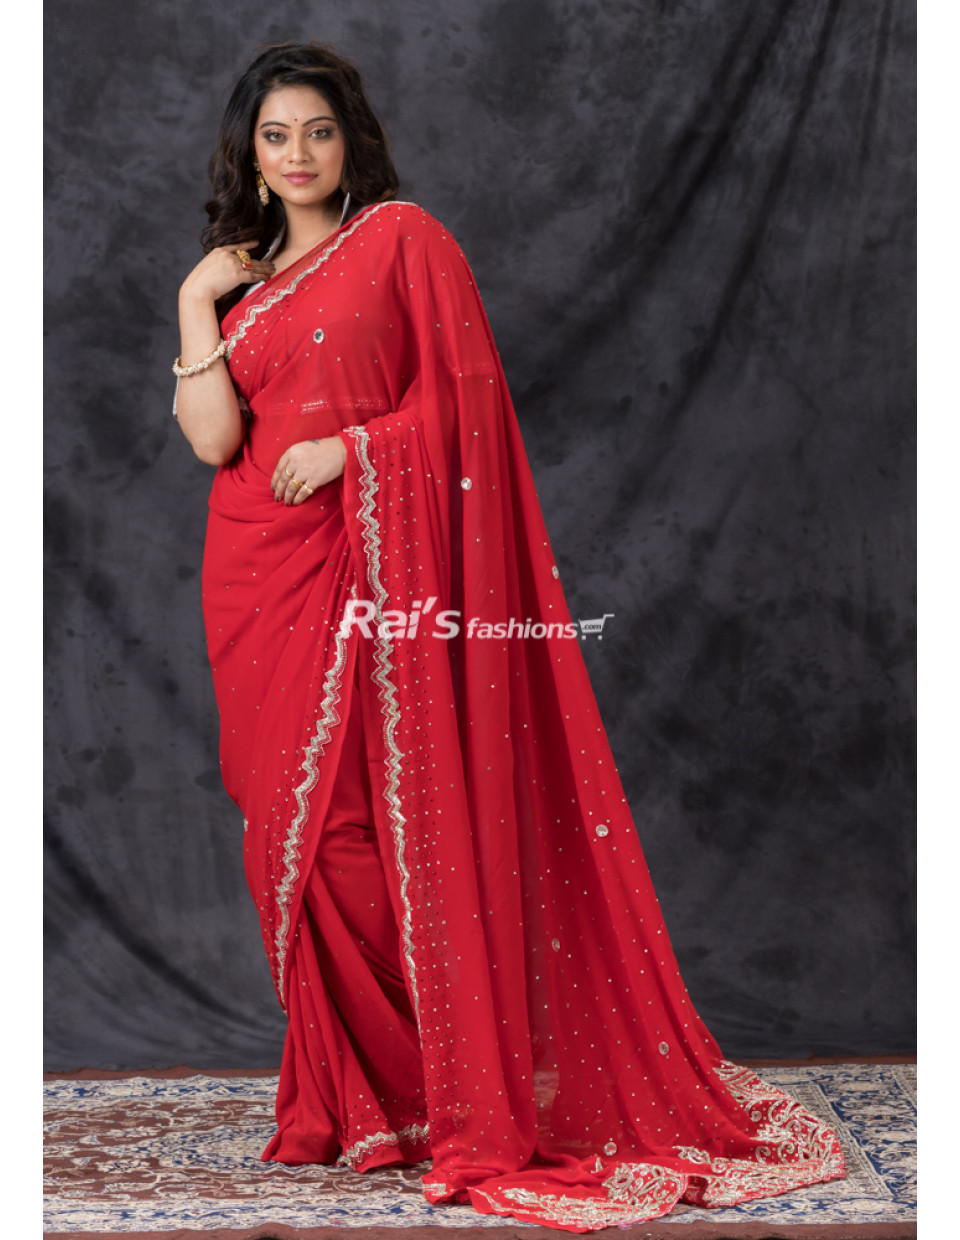 Pure Premium Quality Georgette Red Saree With All Over Heavy Stone Work (KR1287)